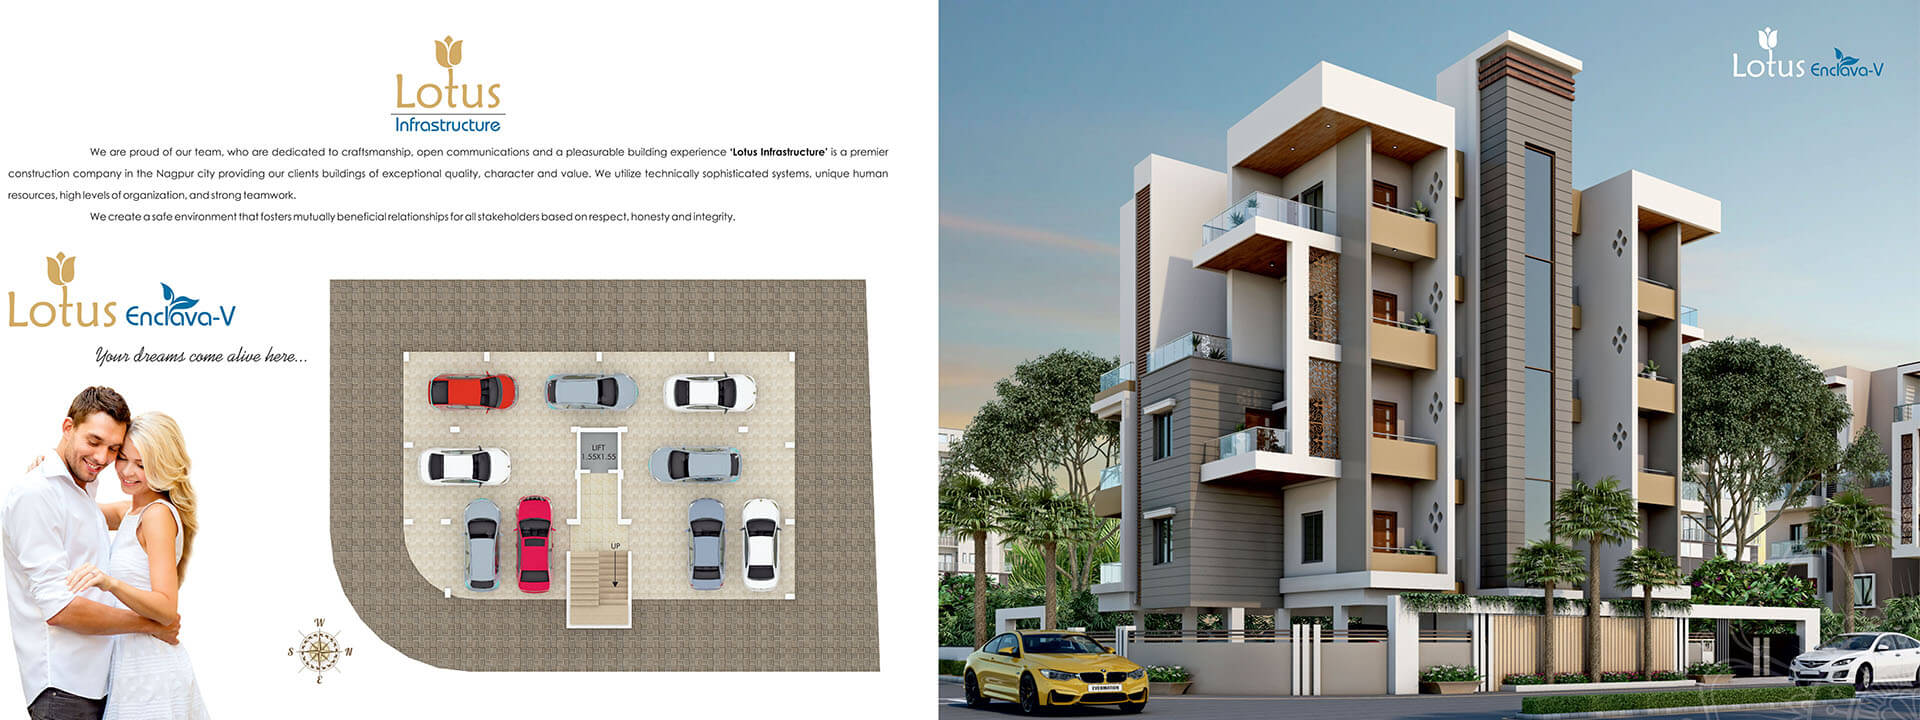 Lotus Enclave 5-our completed project